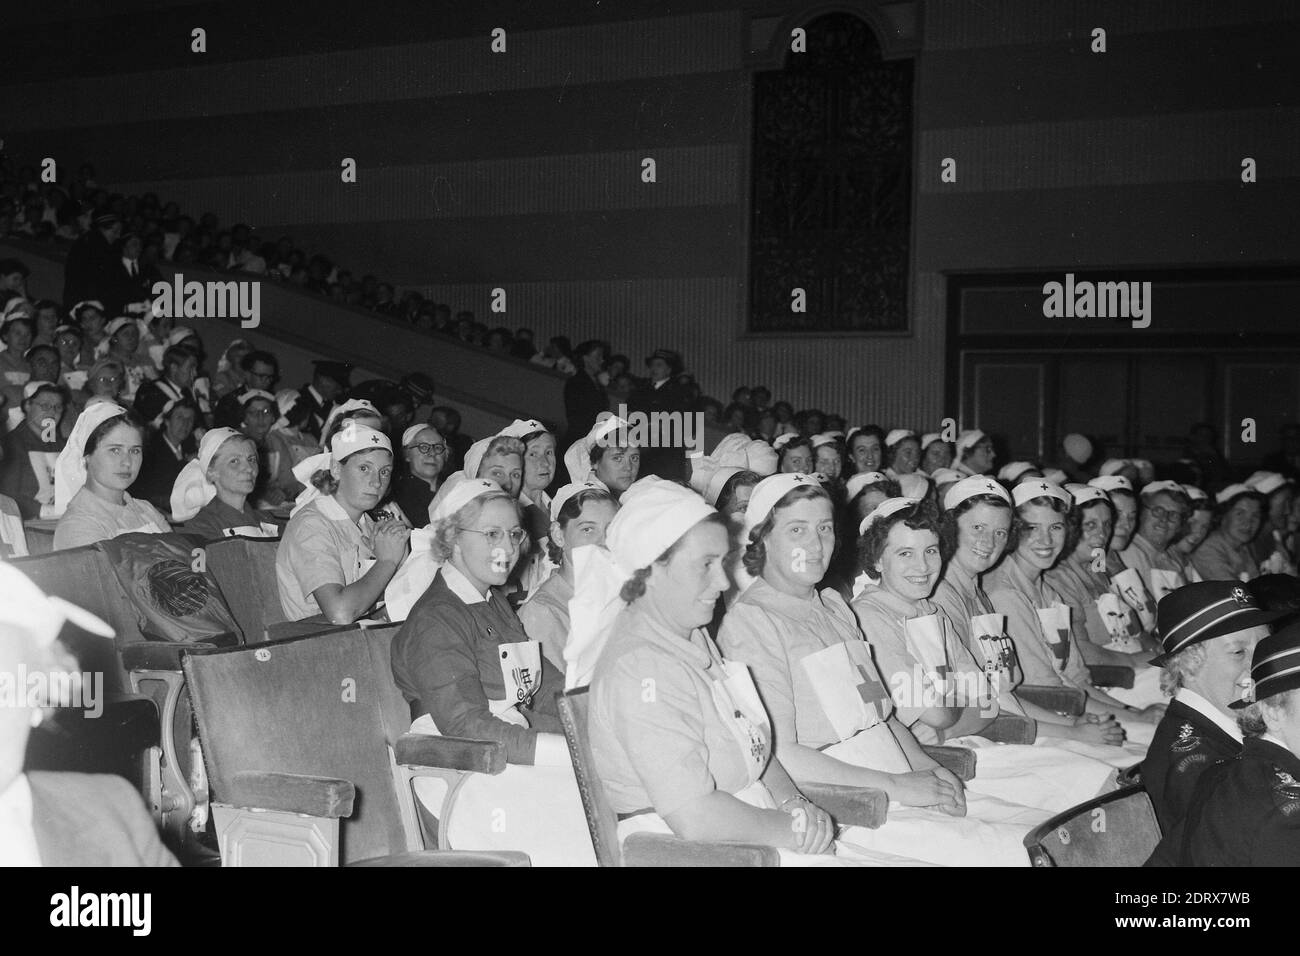 Butlins Holiday Camp. Skegness, Lincolnshire, England, UK. Scanned negatives fro the 1950s Women from the Red Cross in theatre seated area Stock Photo